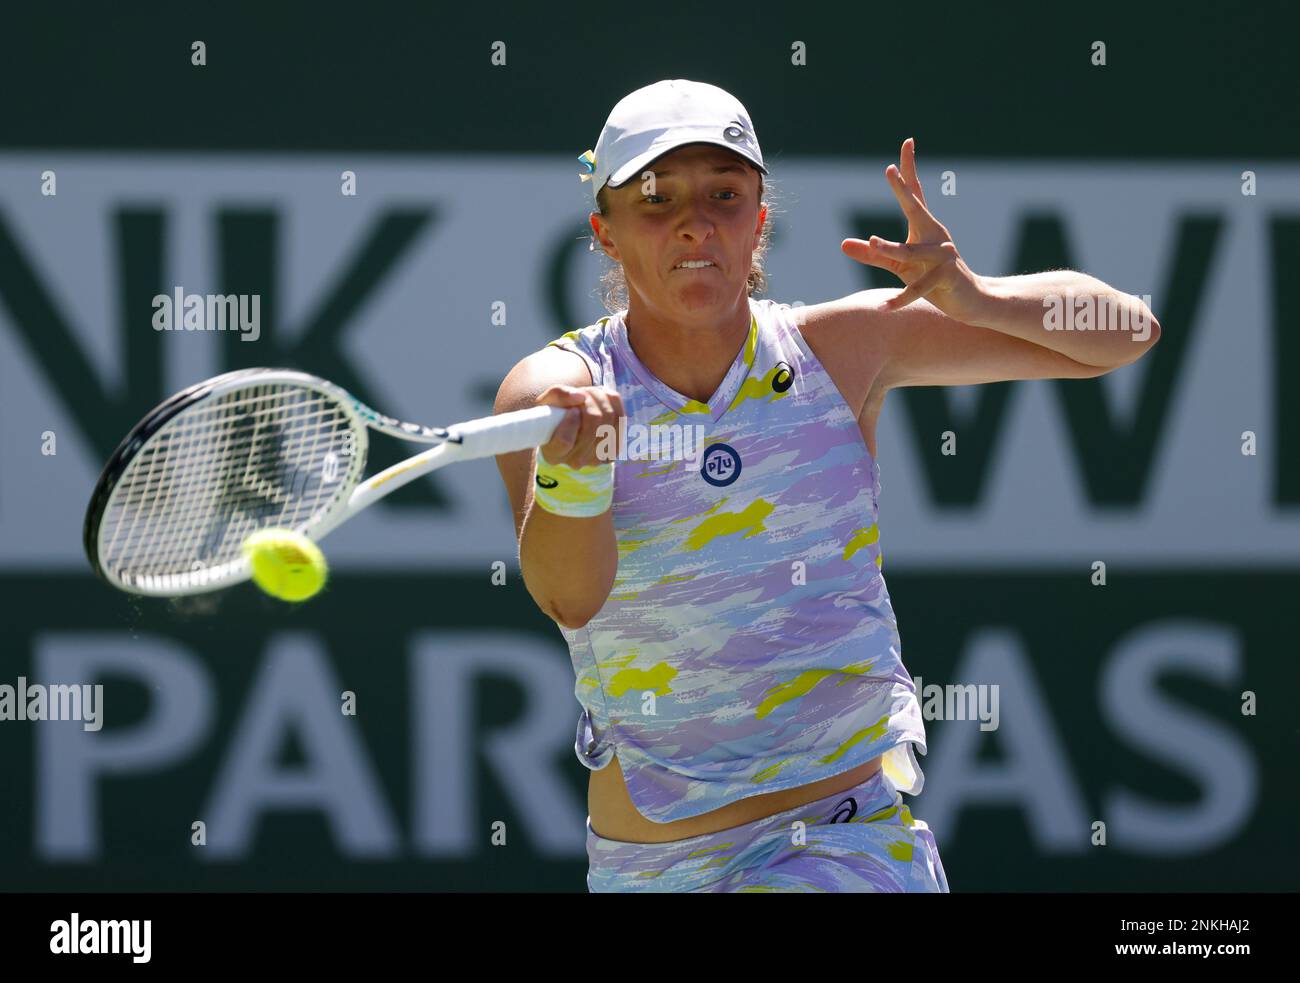 March 20, 2022 Iga Swiatek of Poland returns a shot against Maria Sakkari of Greece in the womens singles finals of the 2022 BNP Paribas Open at Indian Wells Tennis Garden in